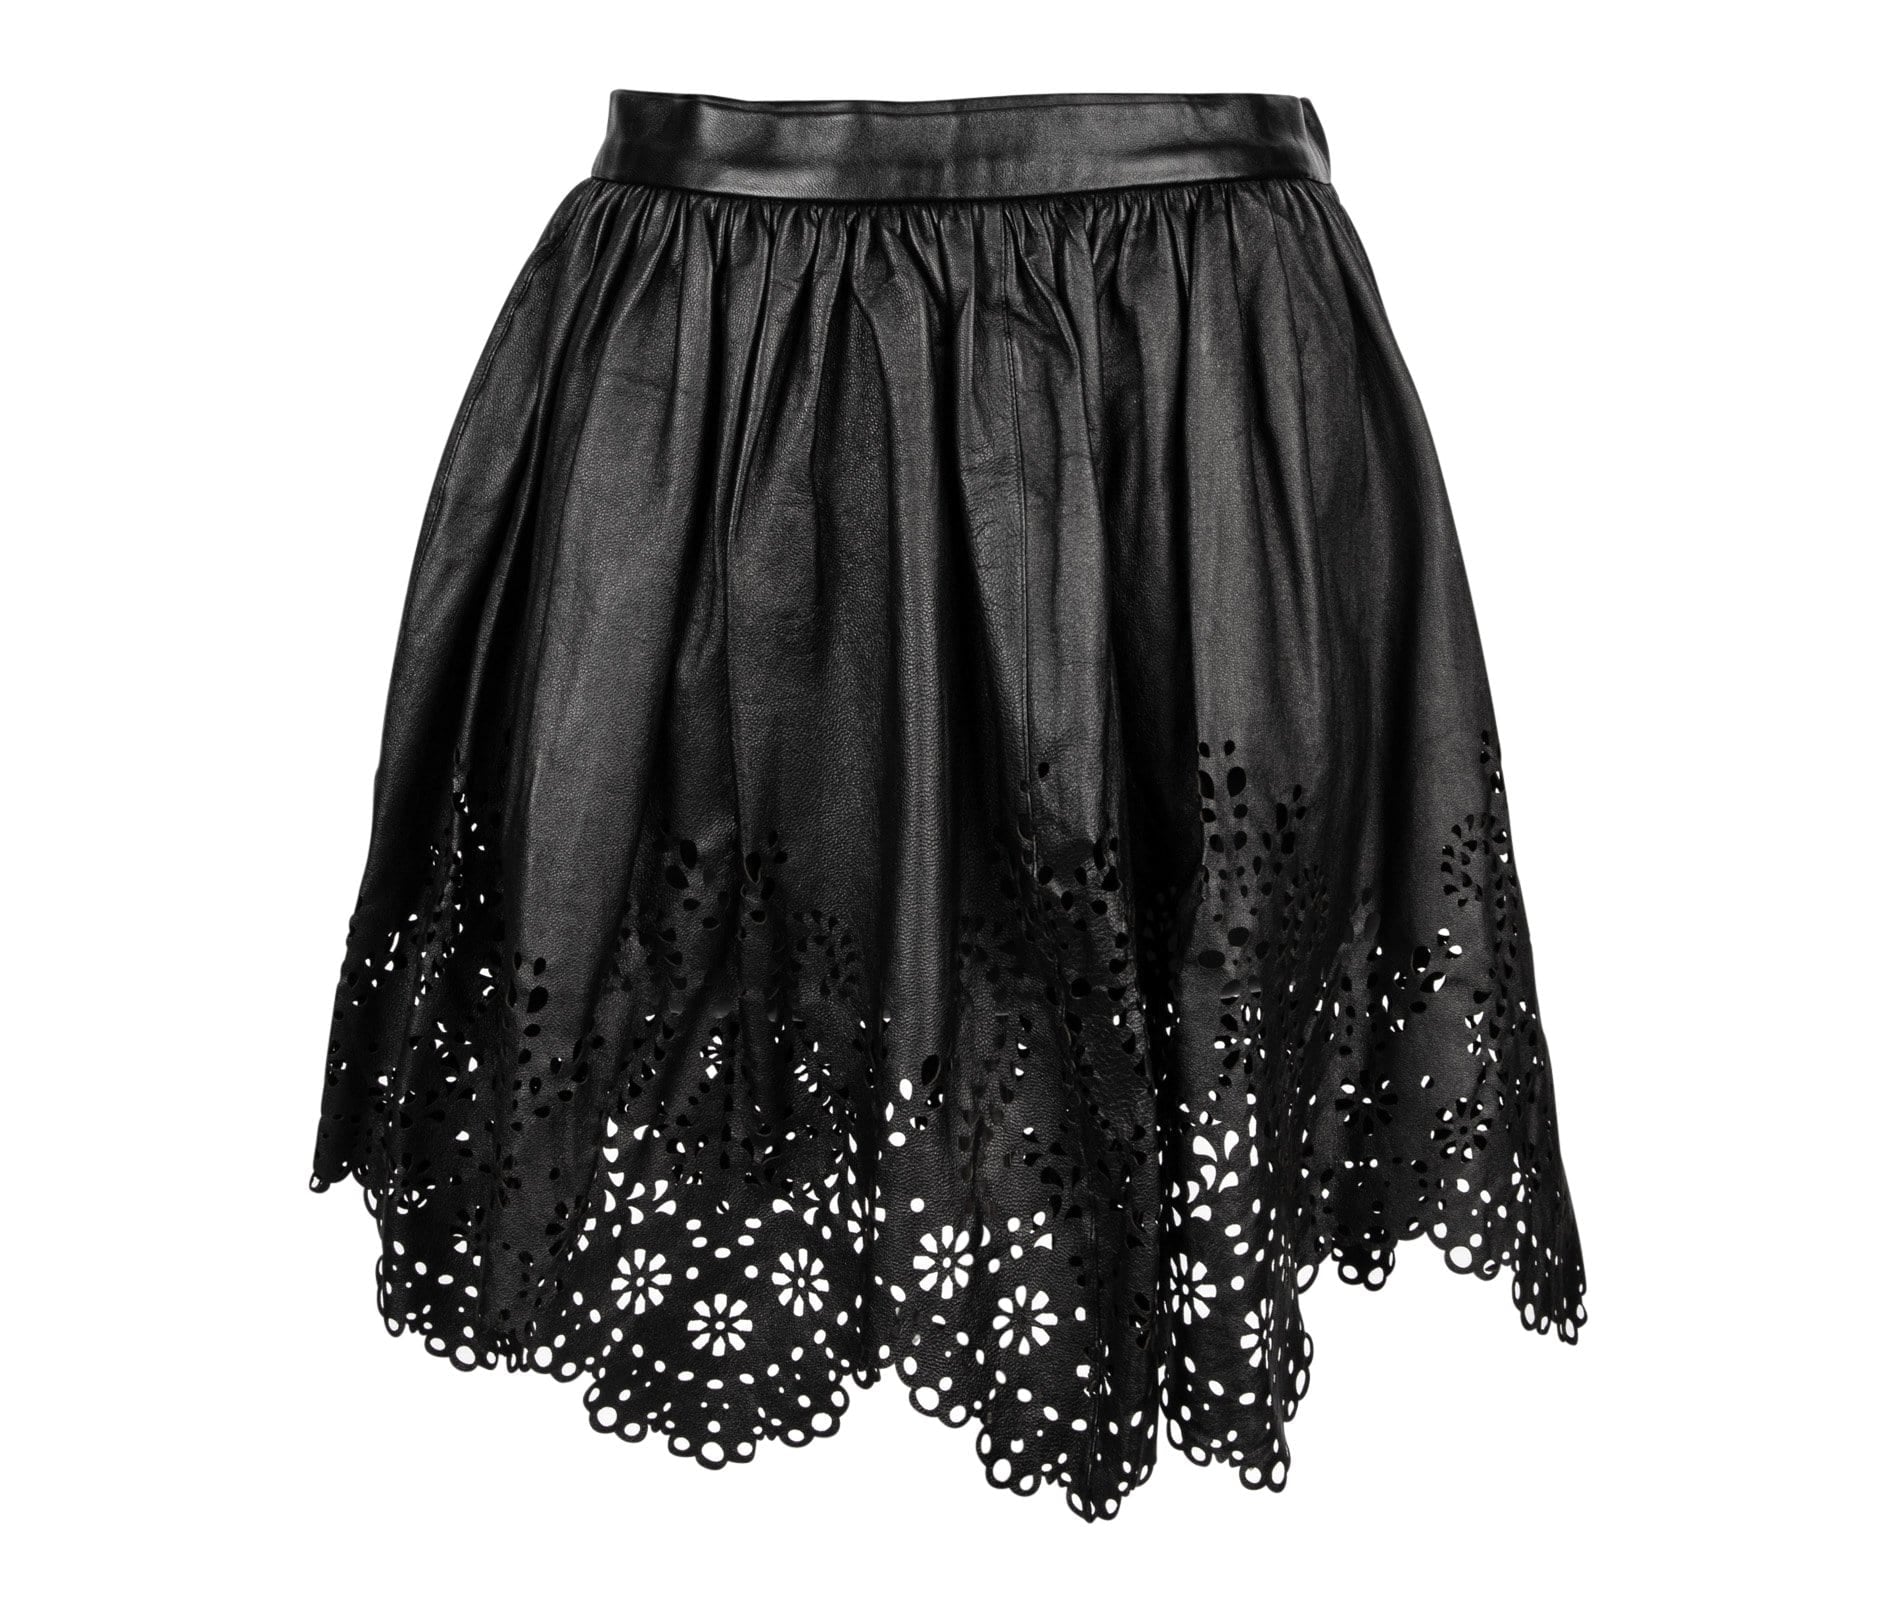 Chloe Skirt Leather Opening Ceremony Laser Cut S New - mightychic